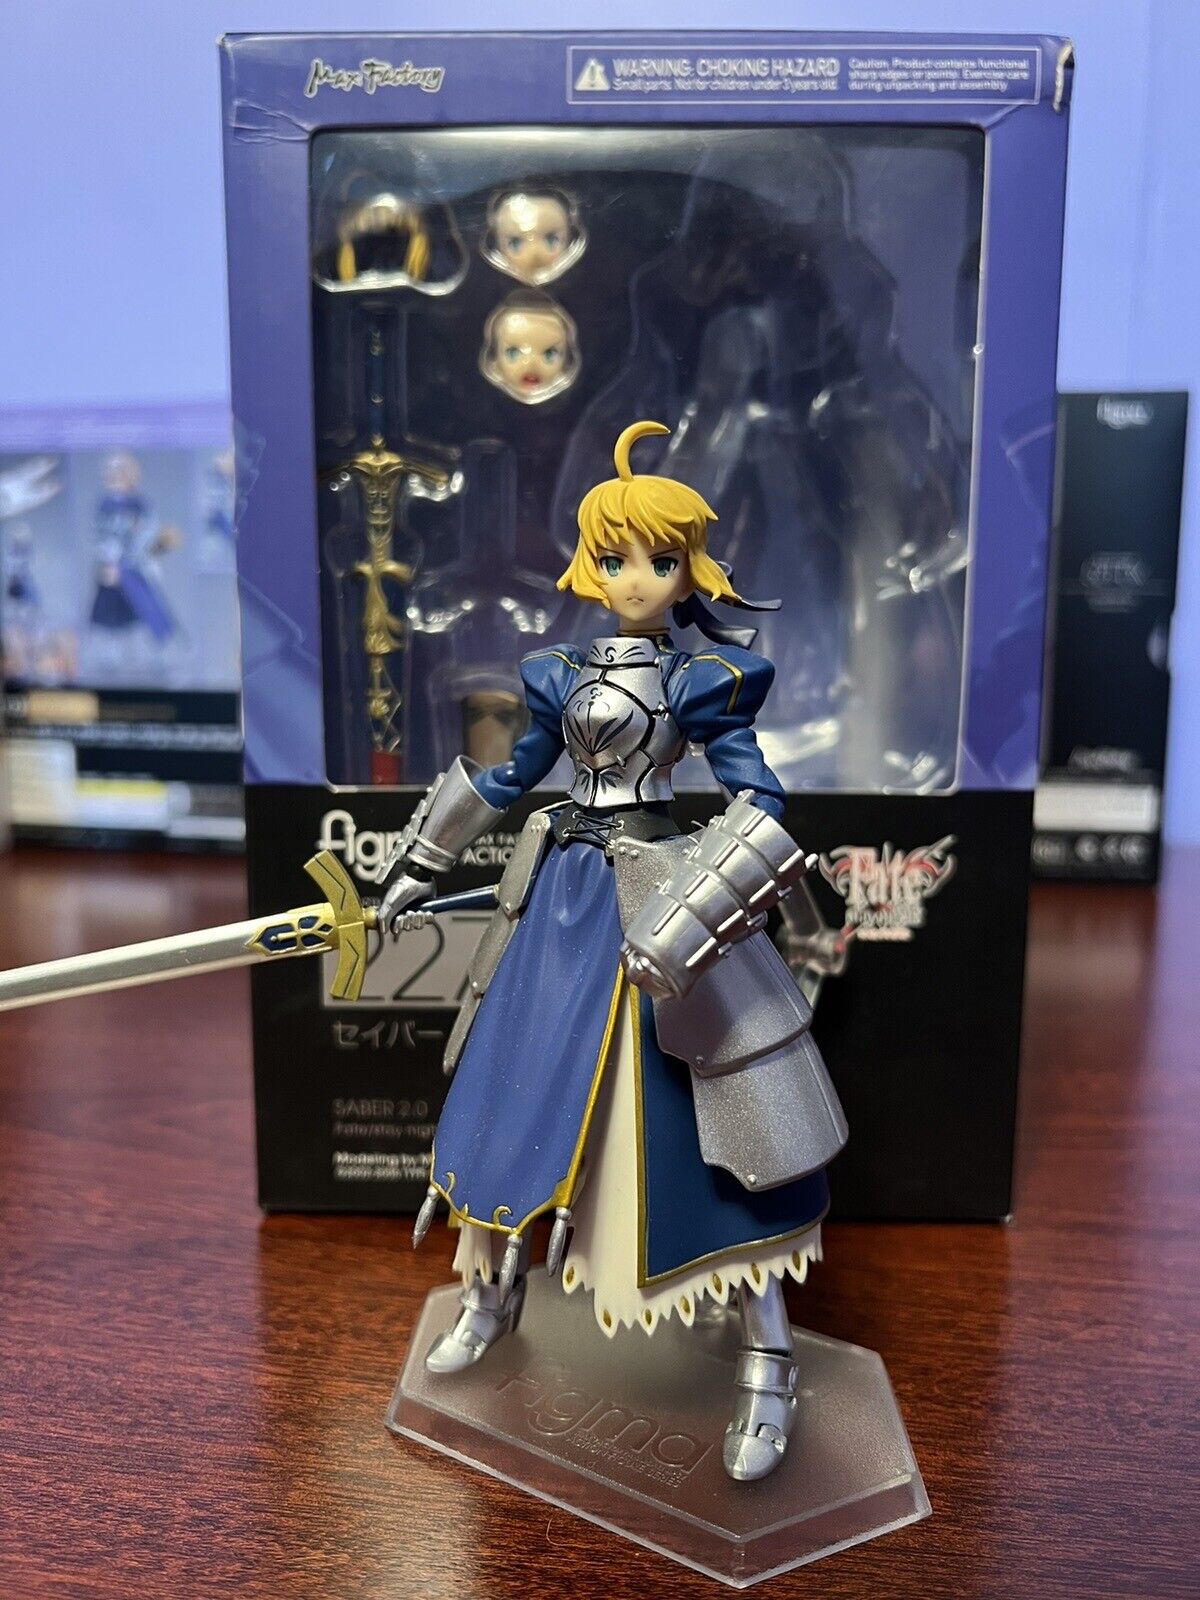 Figma 227 Fate Stay Night Saber 2.0 by Max Factory